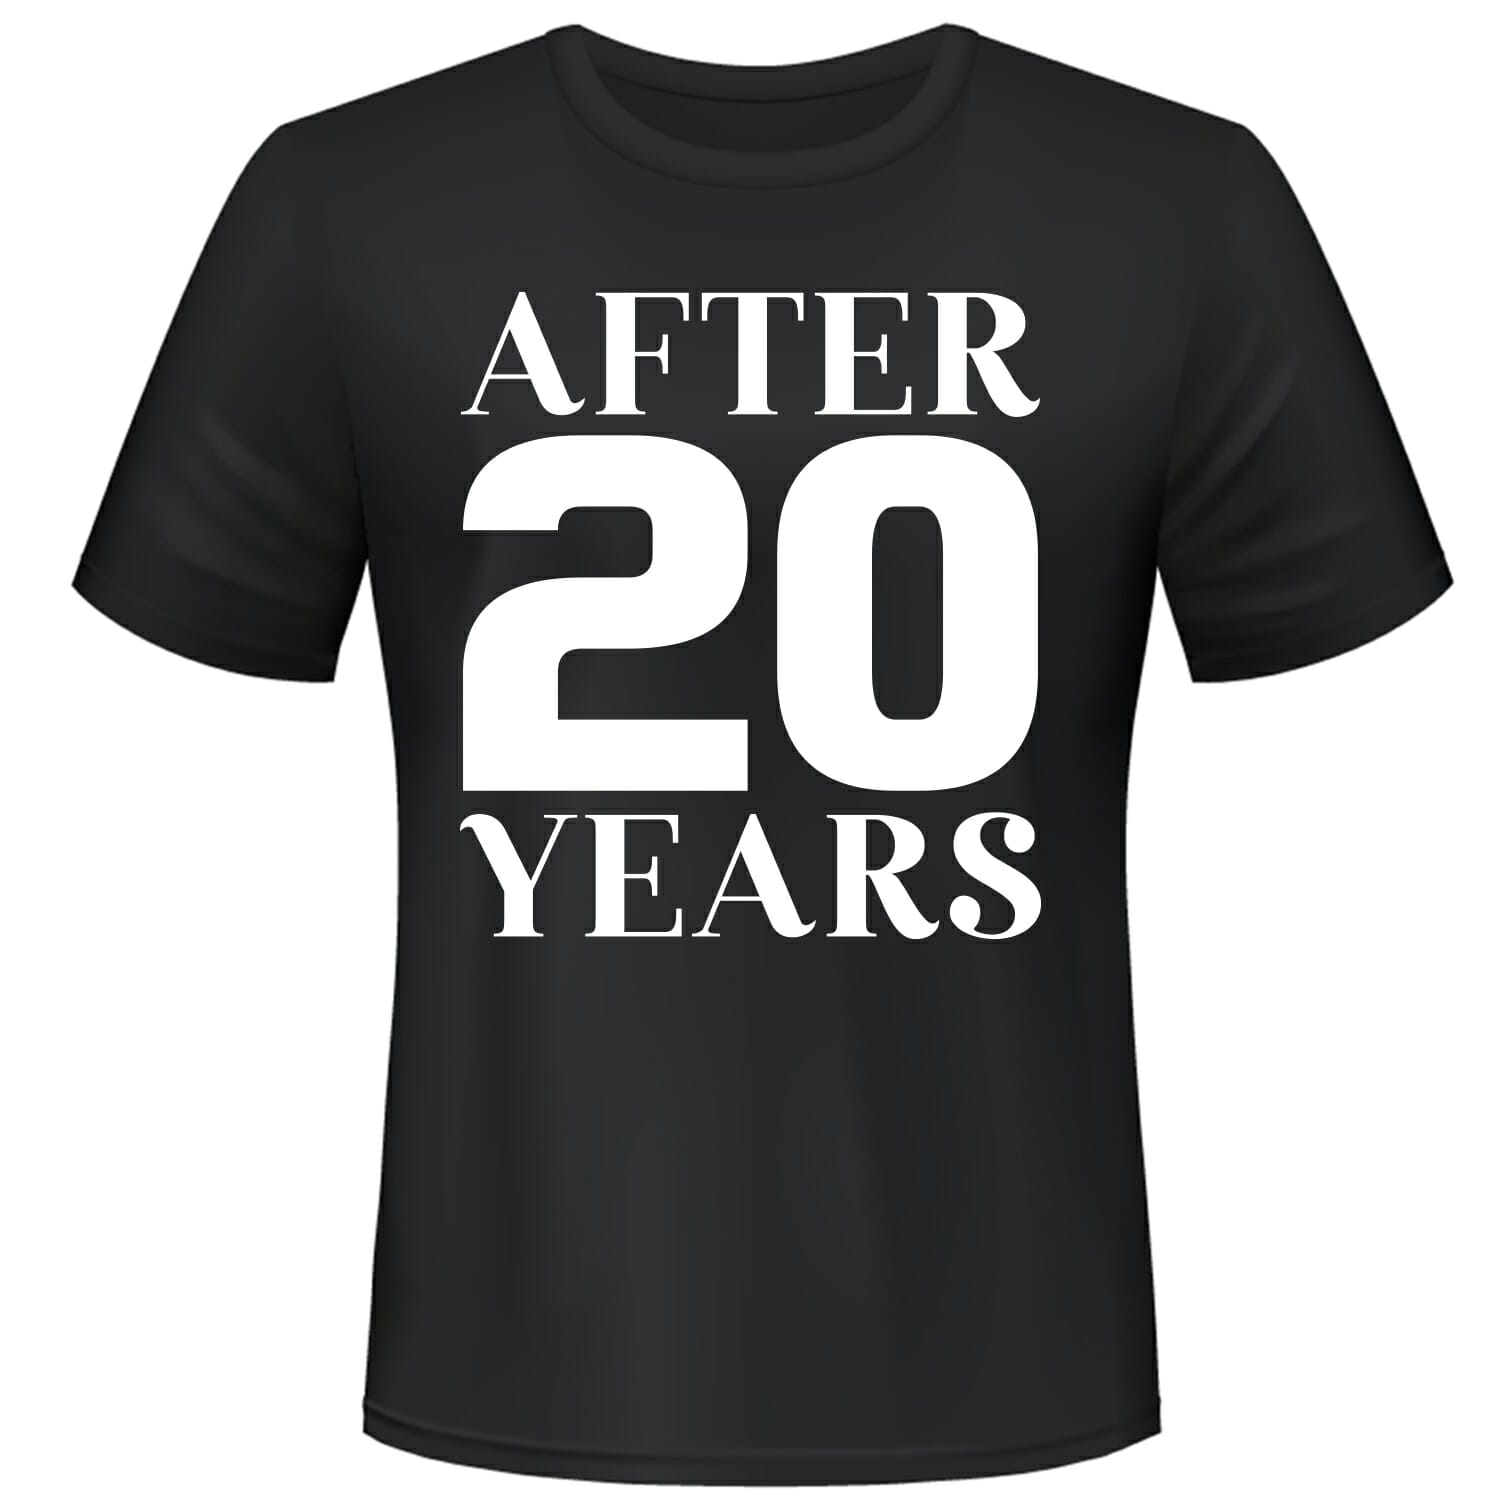 After-20-years-funny-tshirt-desing